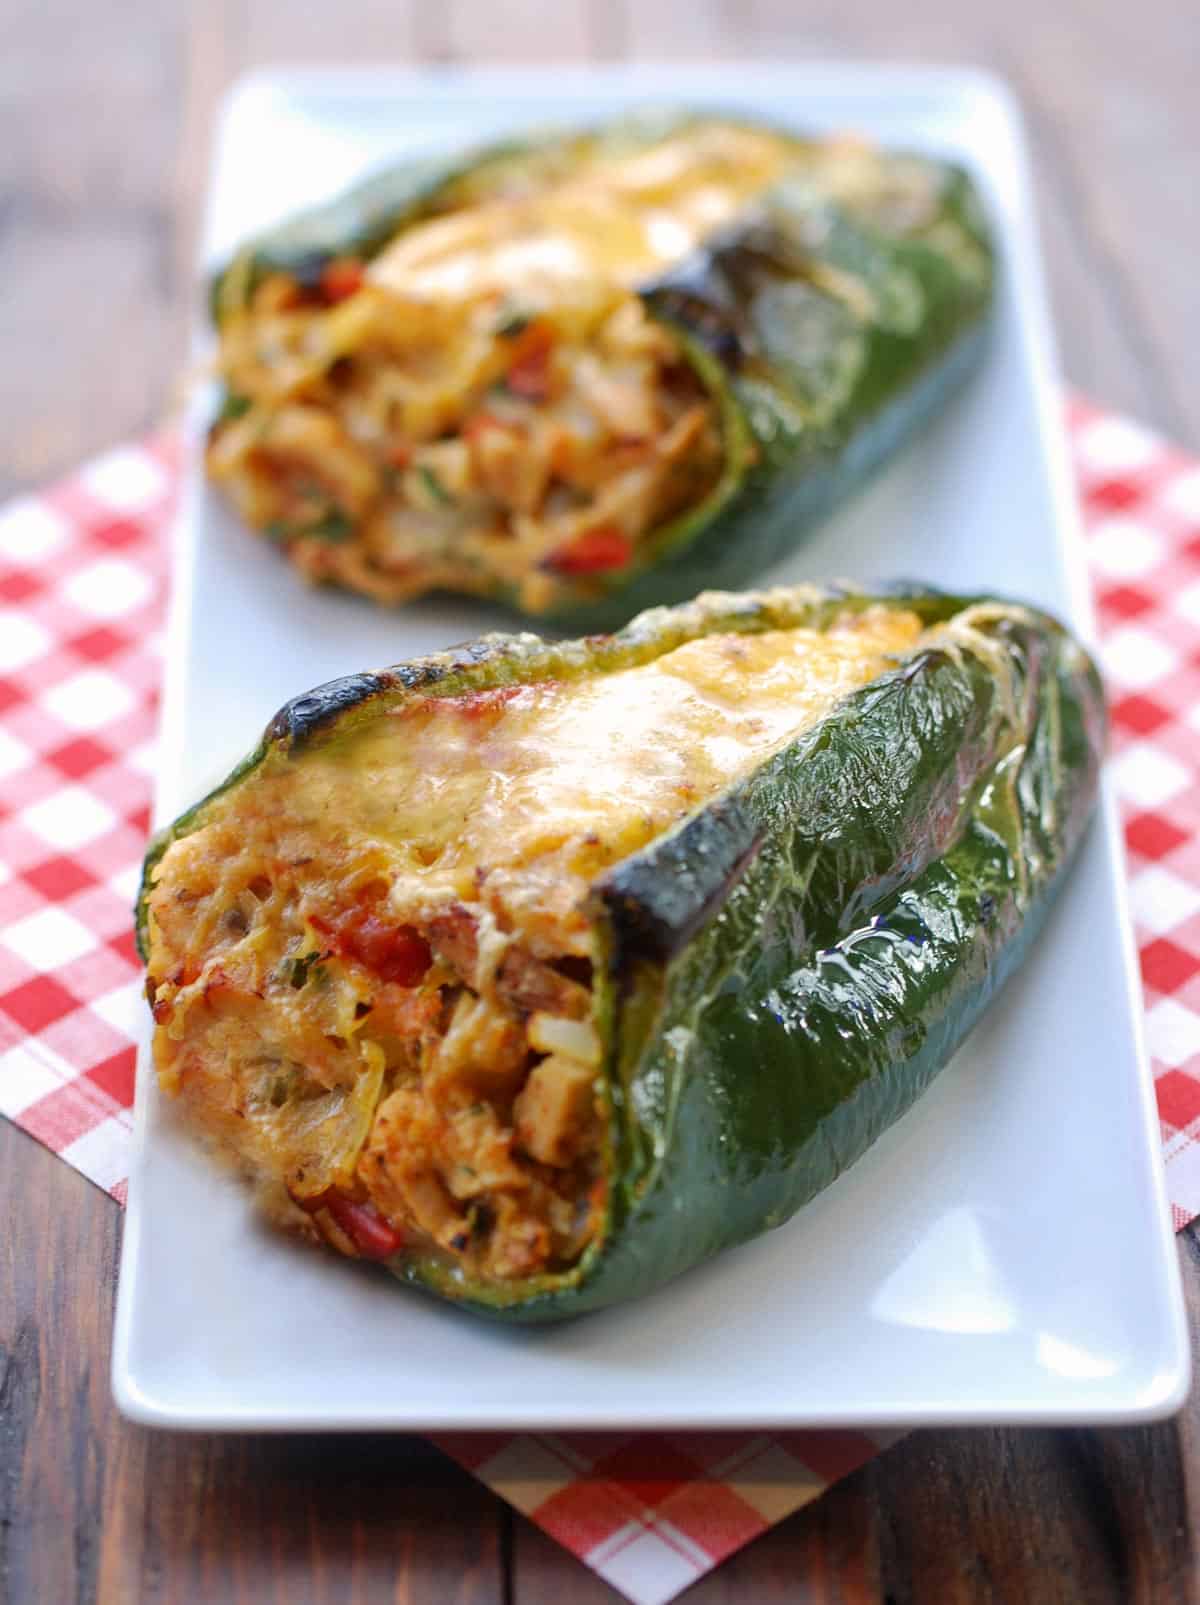 Stuffed poblano peppers served on a white plate with a napkin.